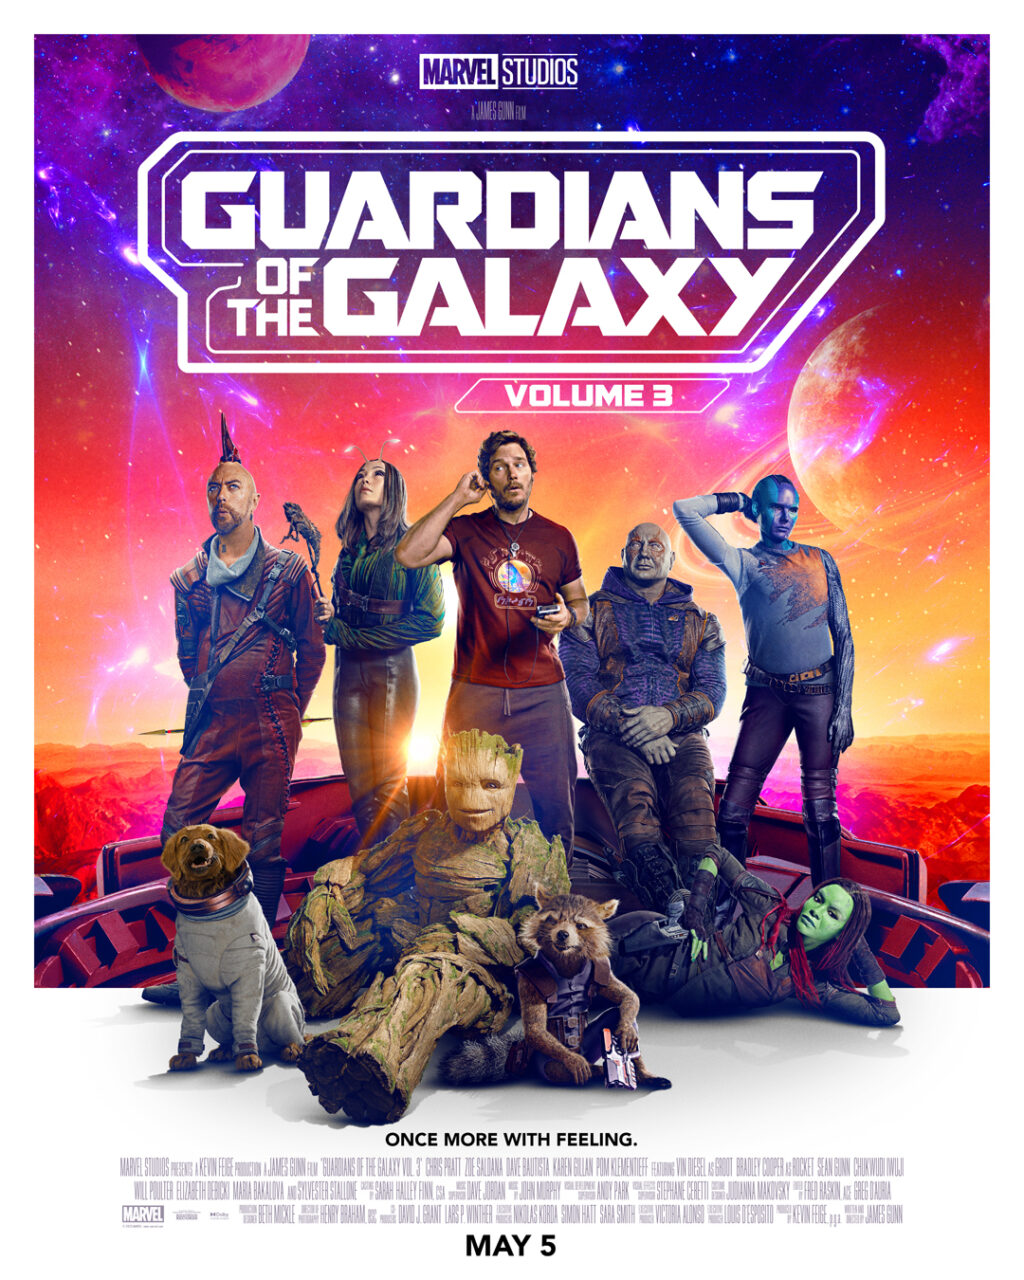 Guardians Of The Galaxy Volume 3 poster (Marvel Studios)